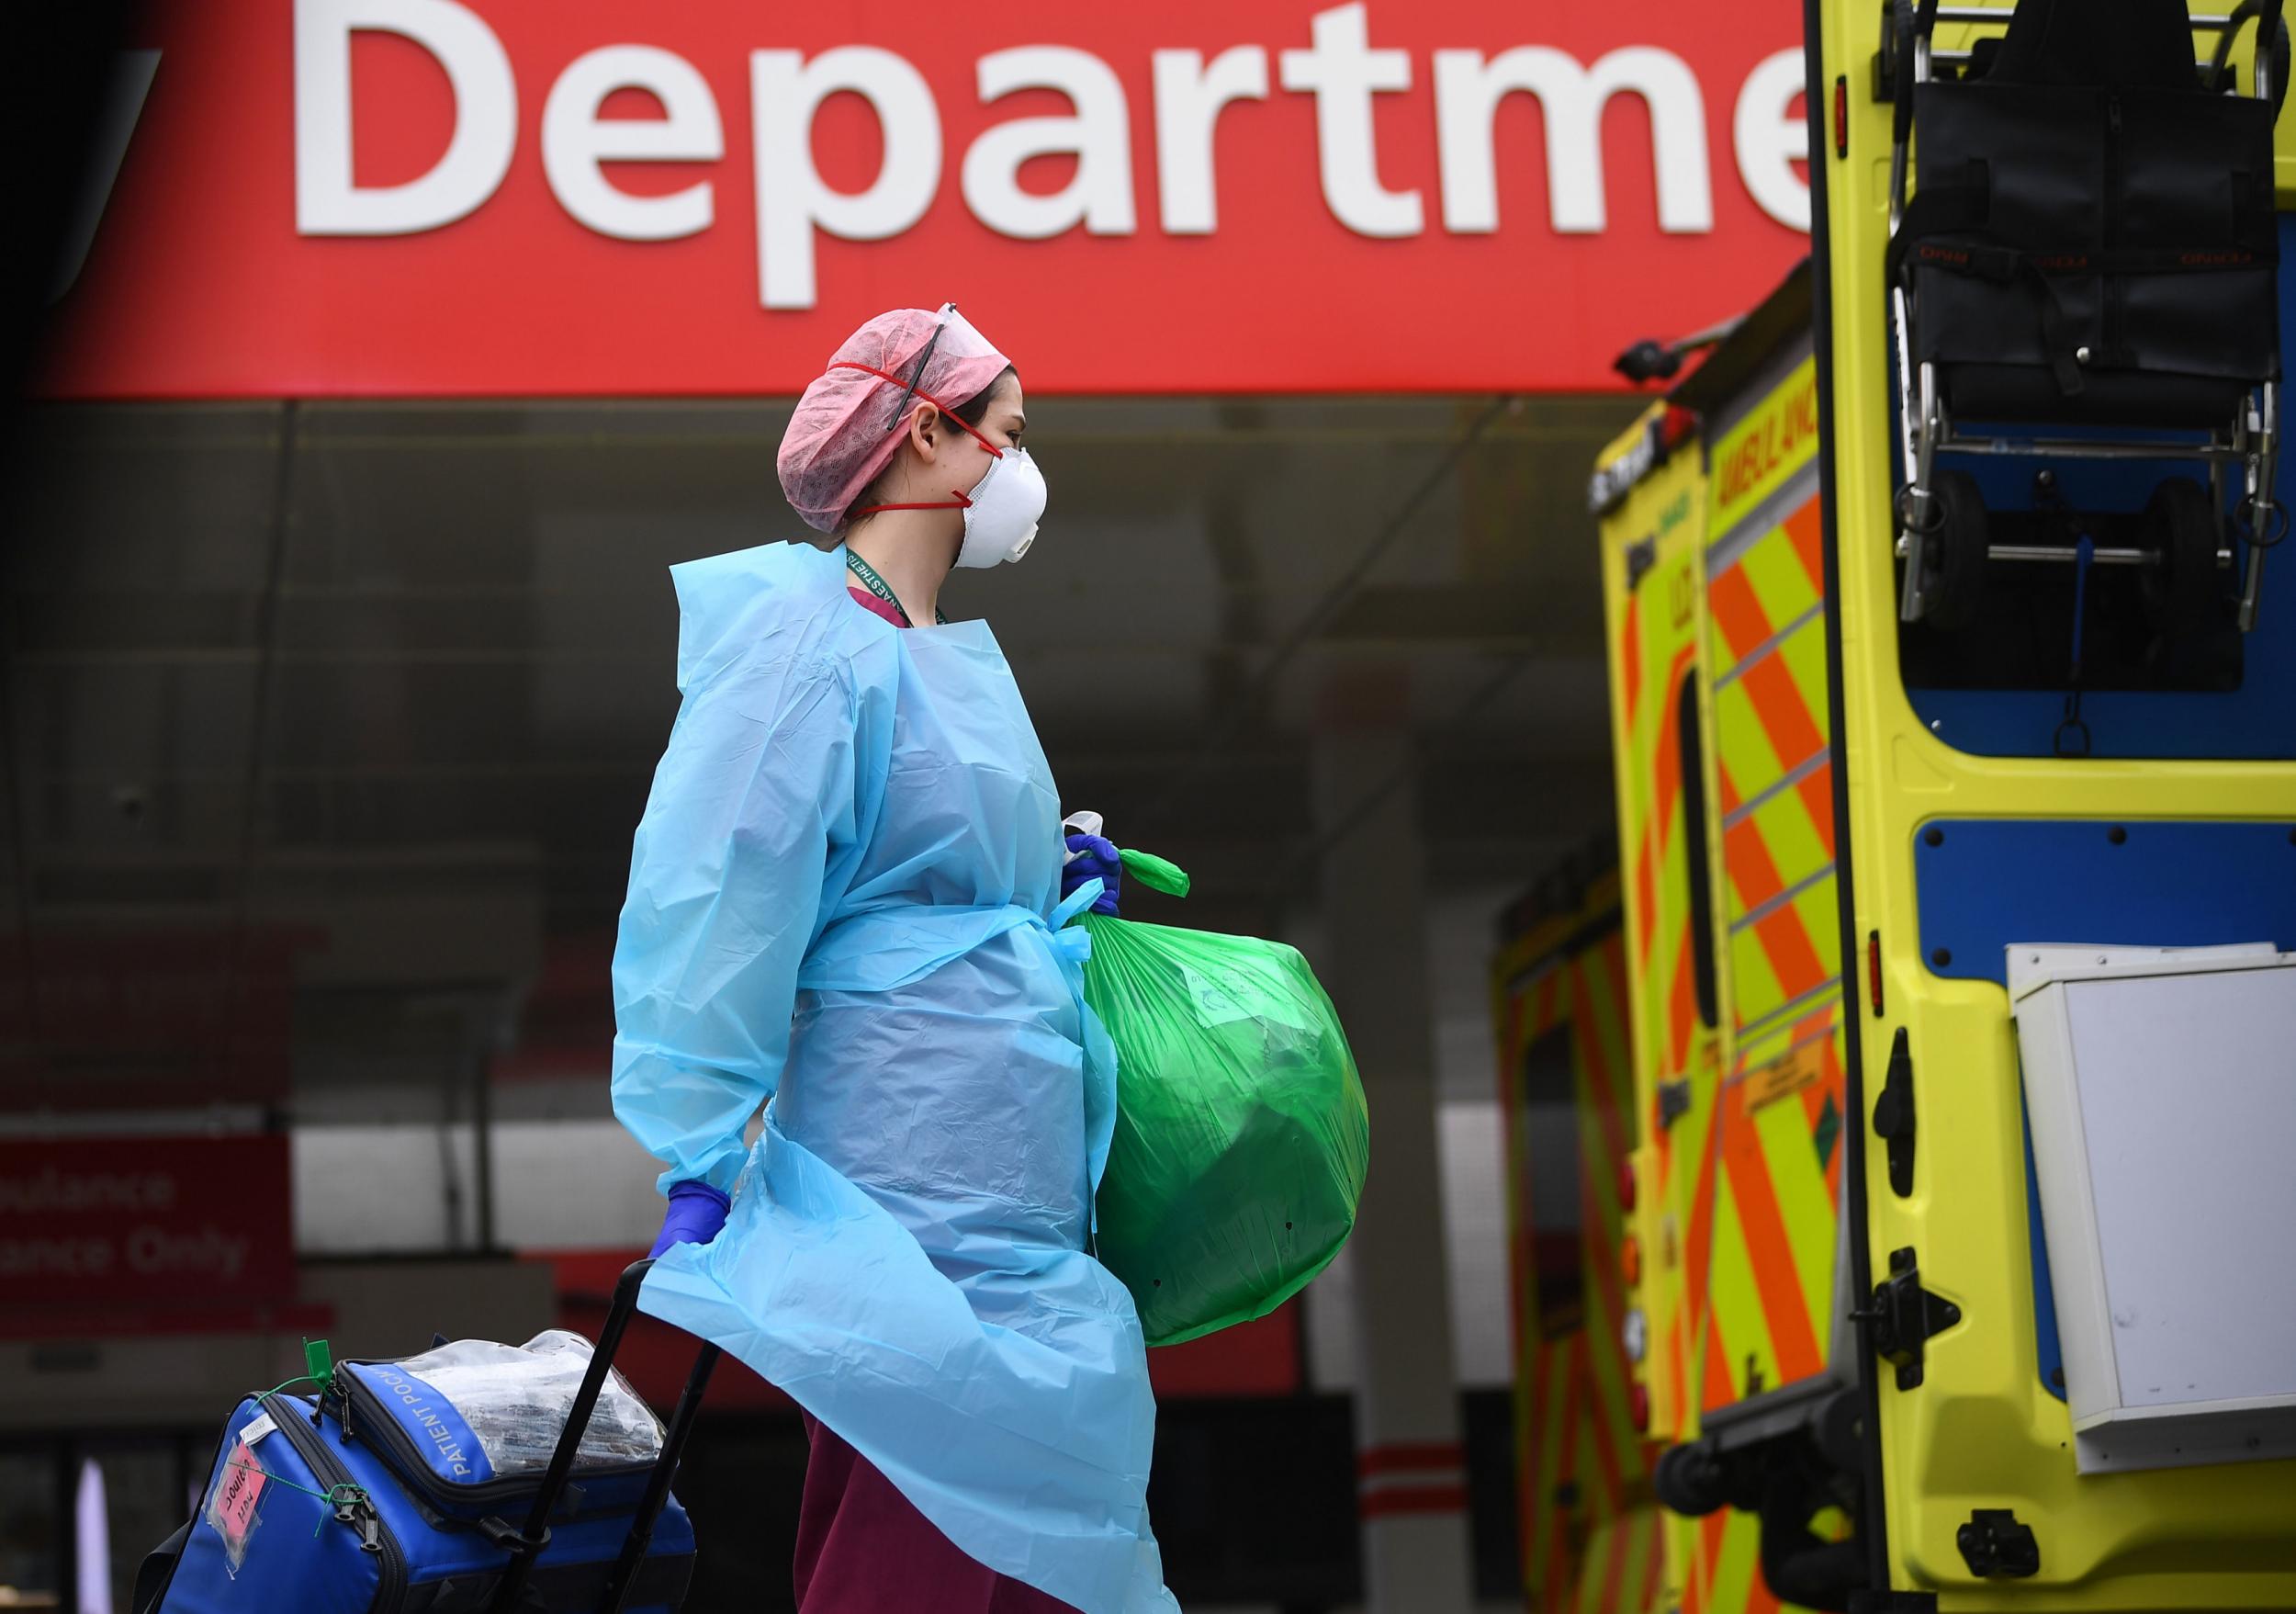 Coronavirus: NHS doctors 'gagged' over protective equipment shortages